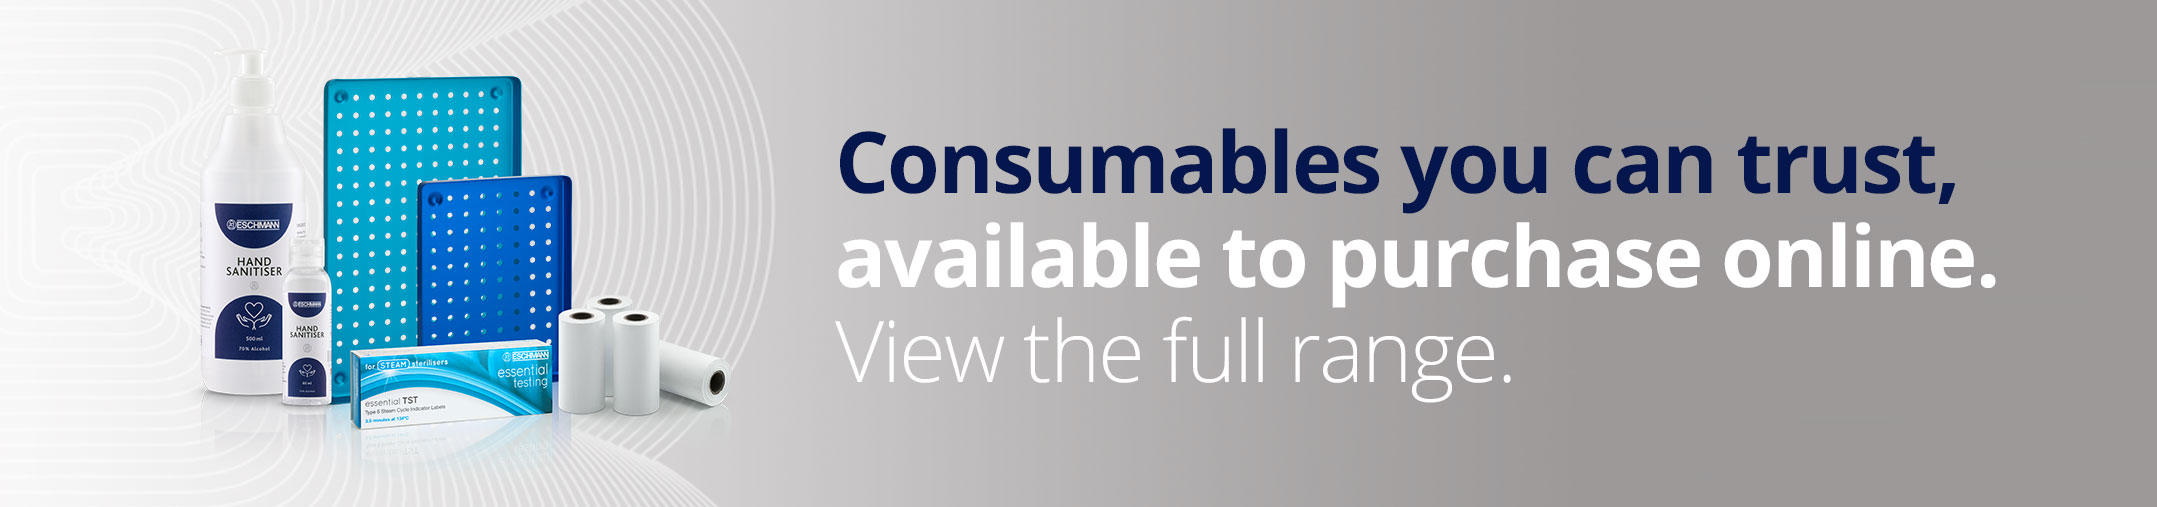 Consumables you can trust, available to purchase online. View the full range.